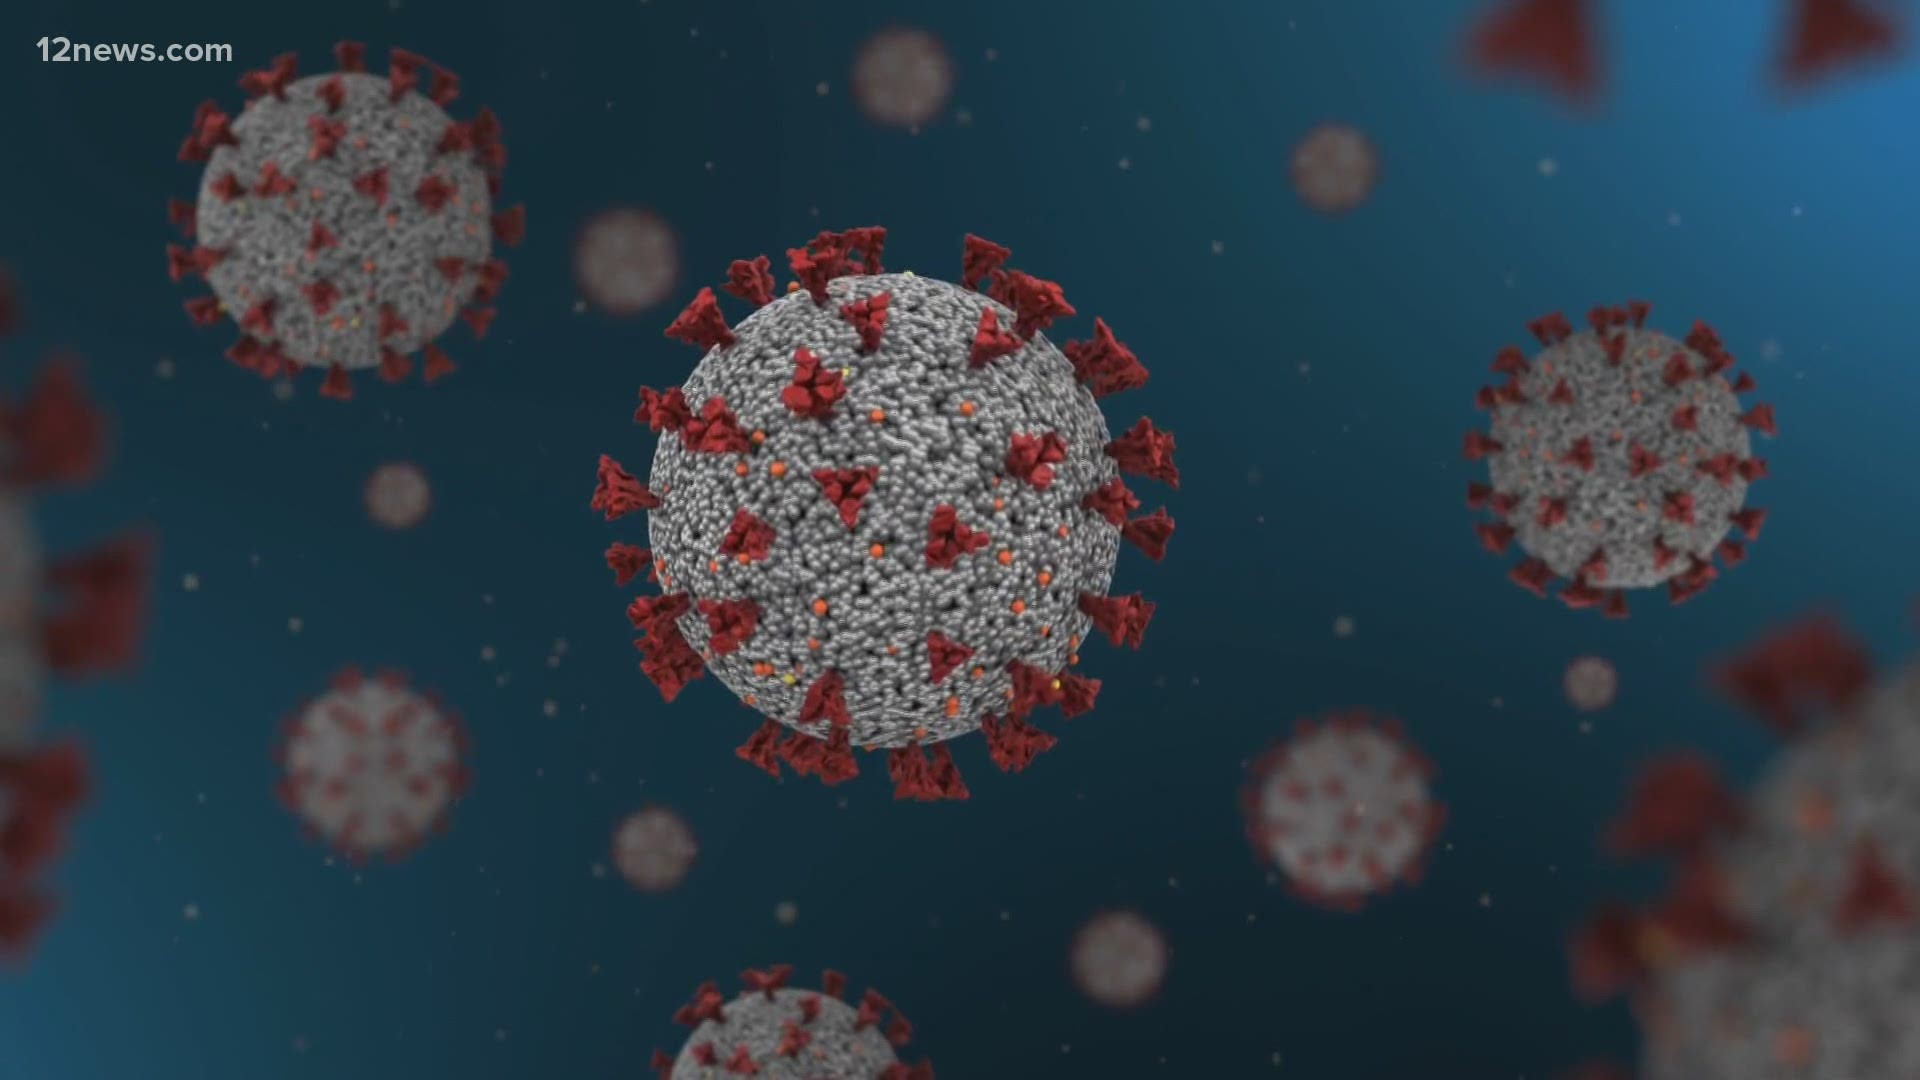 New data from a non-profit research group suggests nearly all of Arizona's COVID-19 cases go back to one strain of the virus.